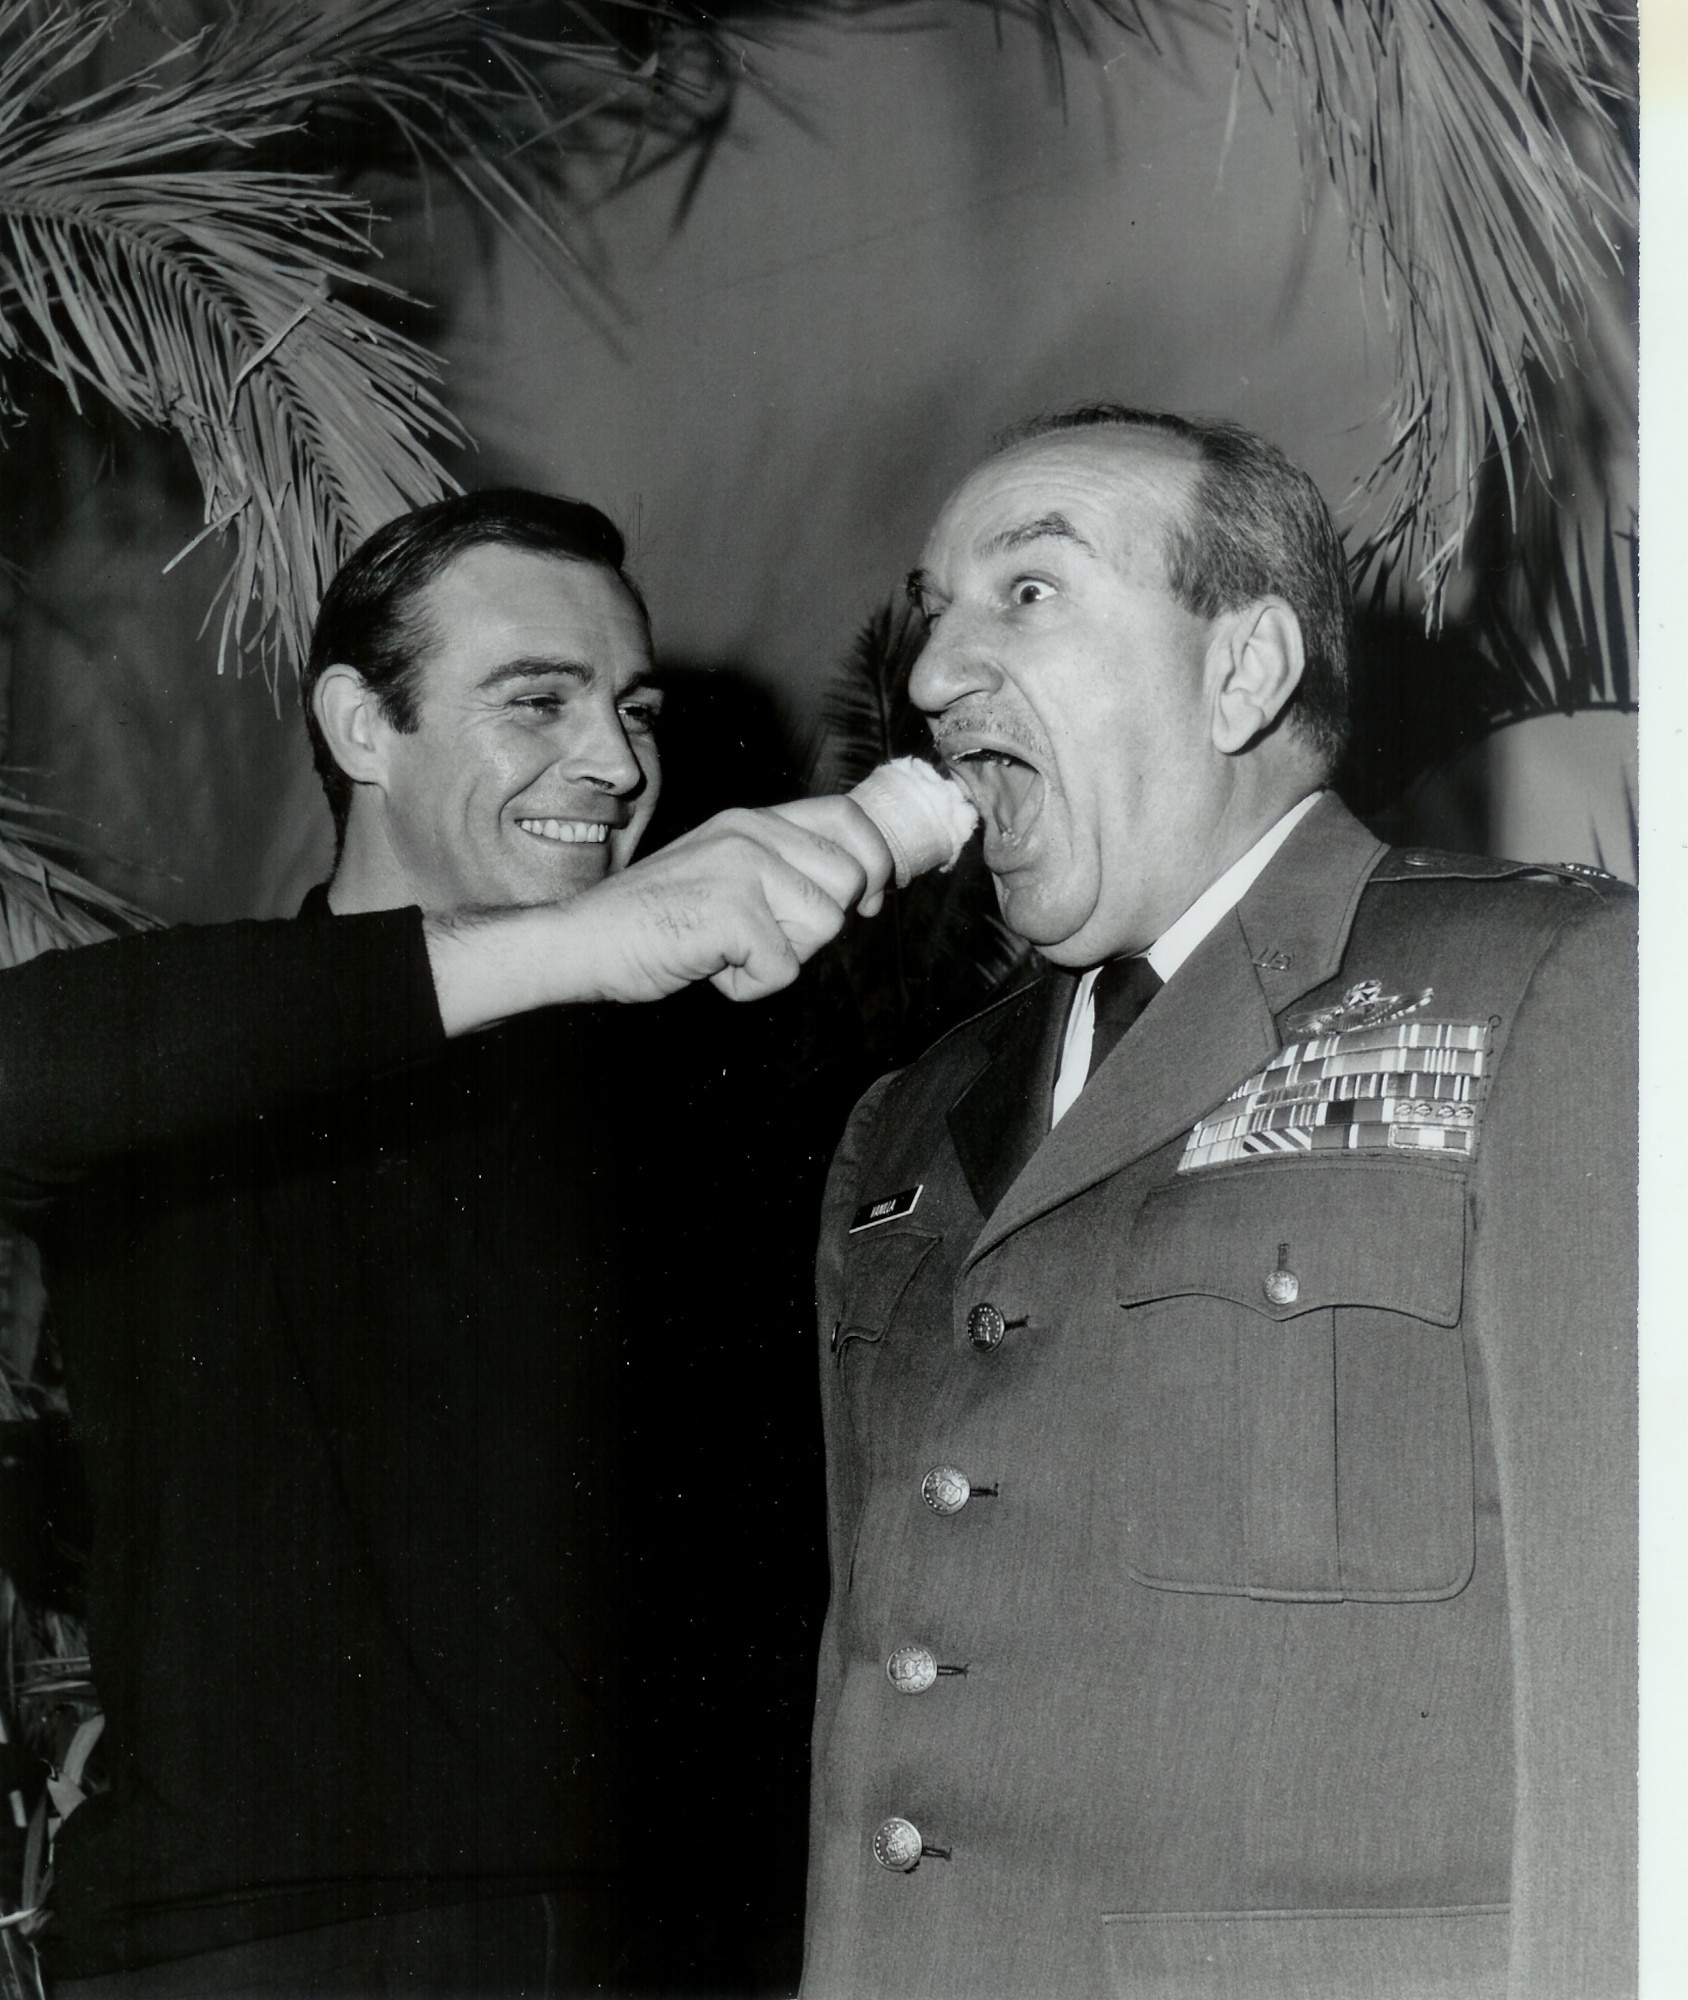 Sean Connery feigns shoving a vanilla ice cream cone in Retired Lieutenant Colonel Charles Russhon’s face during the production of “Thunderball.” Russhon was the military advisor to the James Bond films in the ‘60s and ‘70s. Russhon and Connery became friends on set. The vanilla ice cream cone had special significance to Russhon, who inspired the “Charlie Vanilla” character, an ice cream loving mister fix-it, in friend and esteemed American cartoonist Milton Caniff’s comic strip “Steve Canyon.” (Photo courtesy of Christian Russhon)